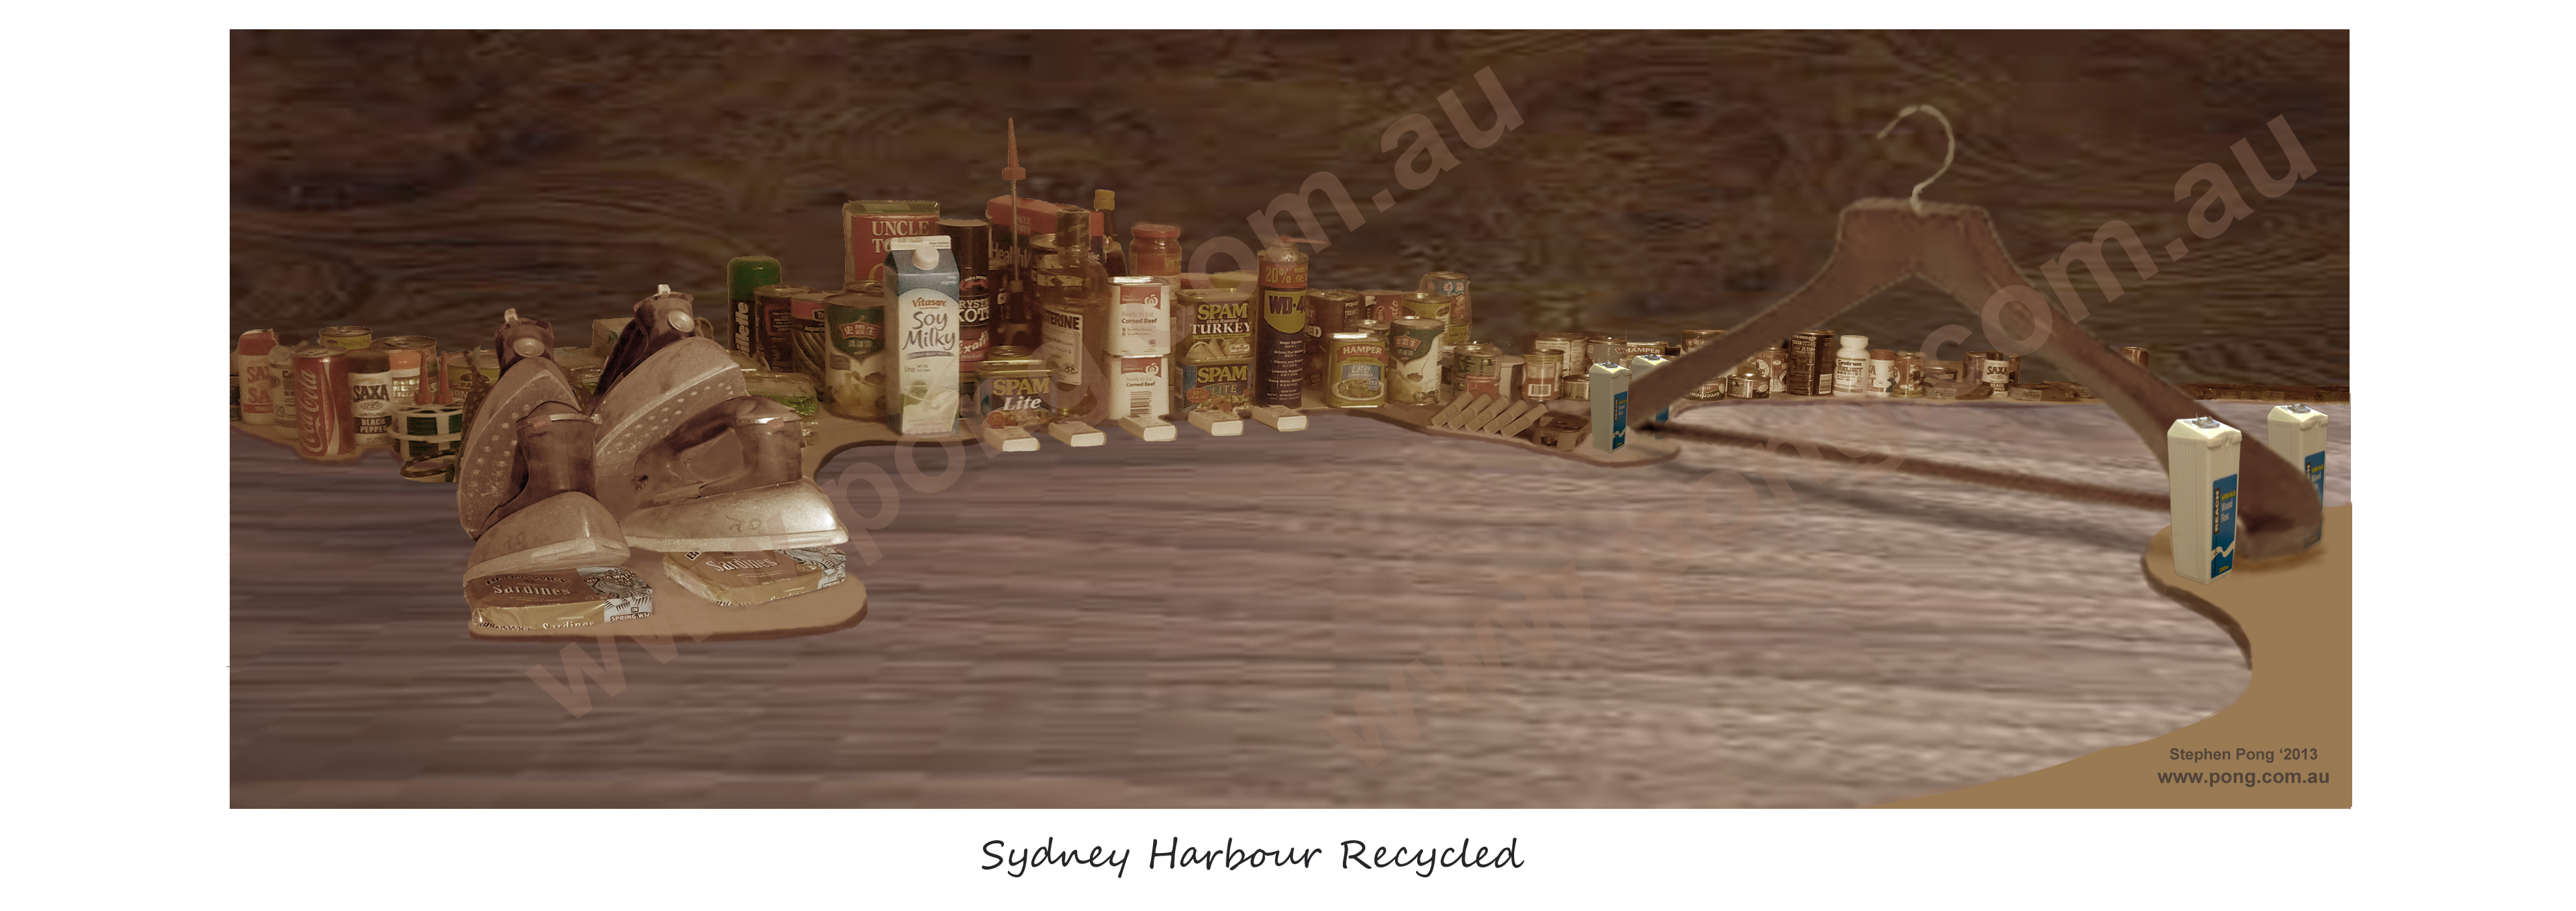 Sydney Harbour Recycled in Wood